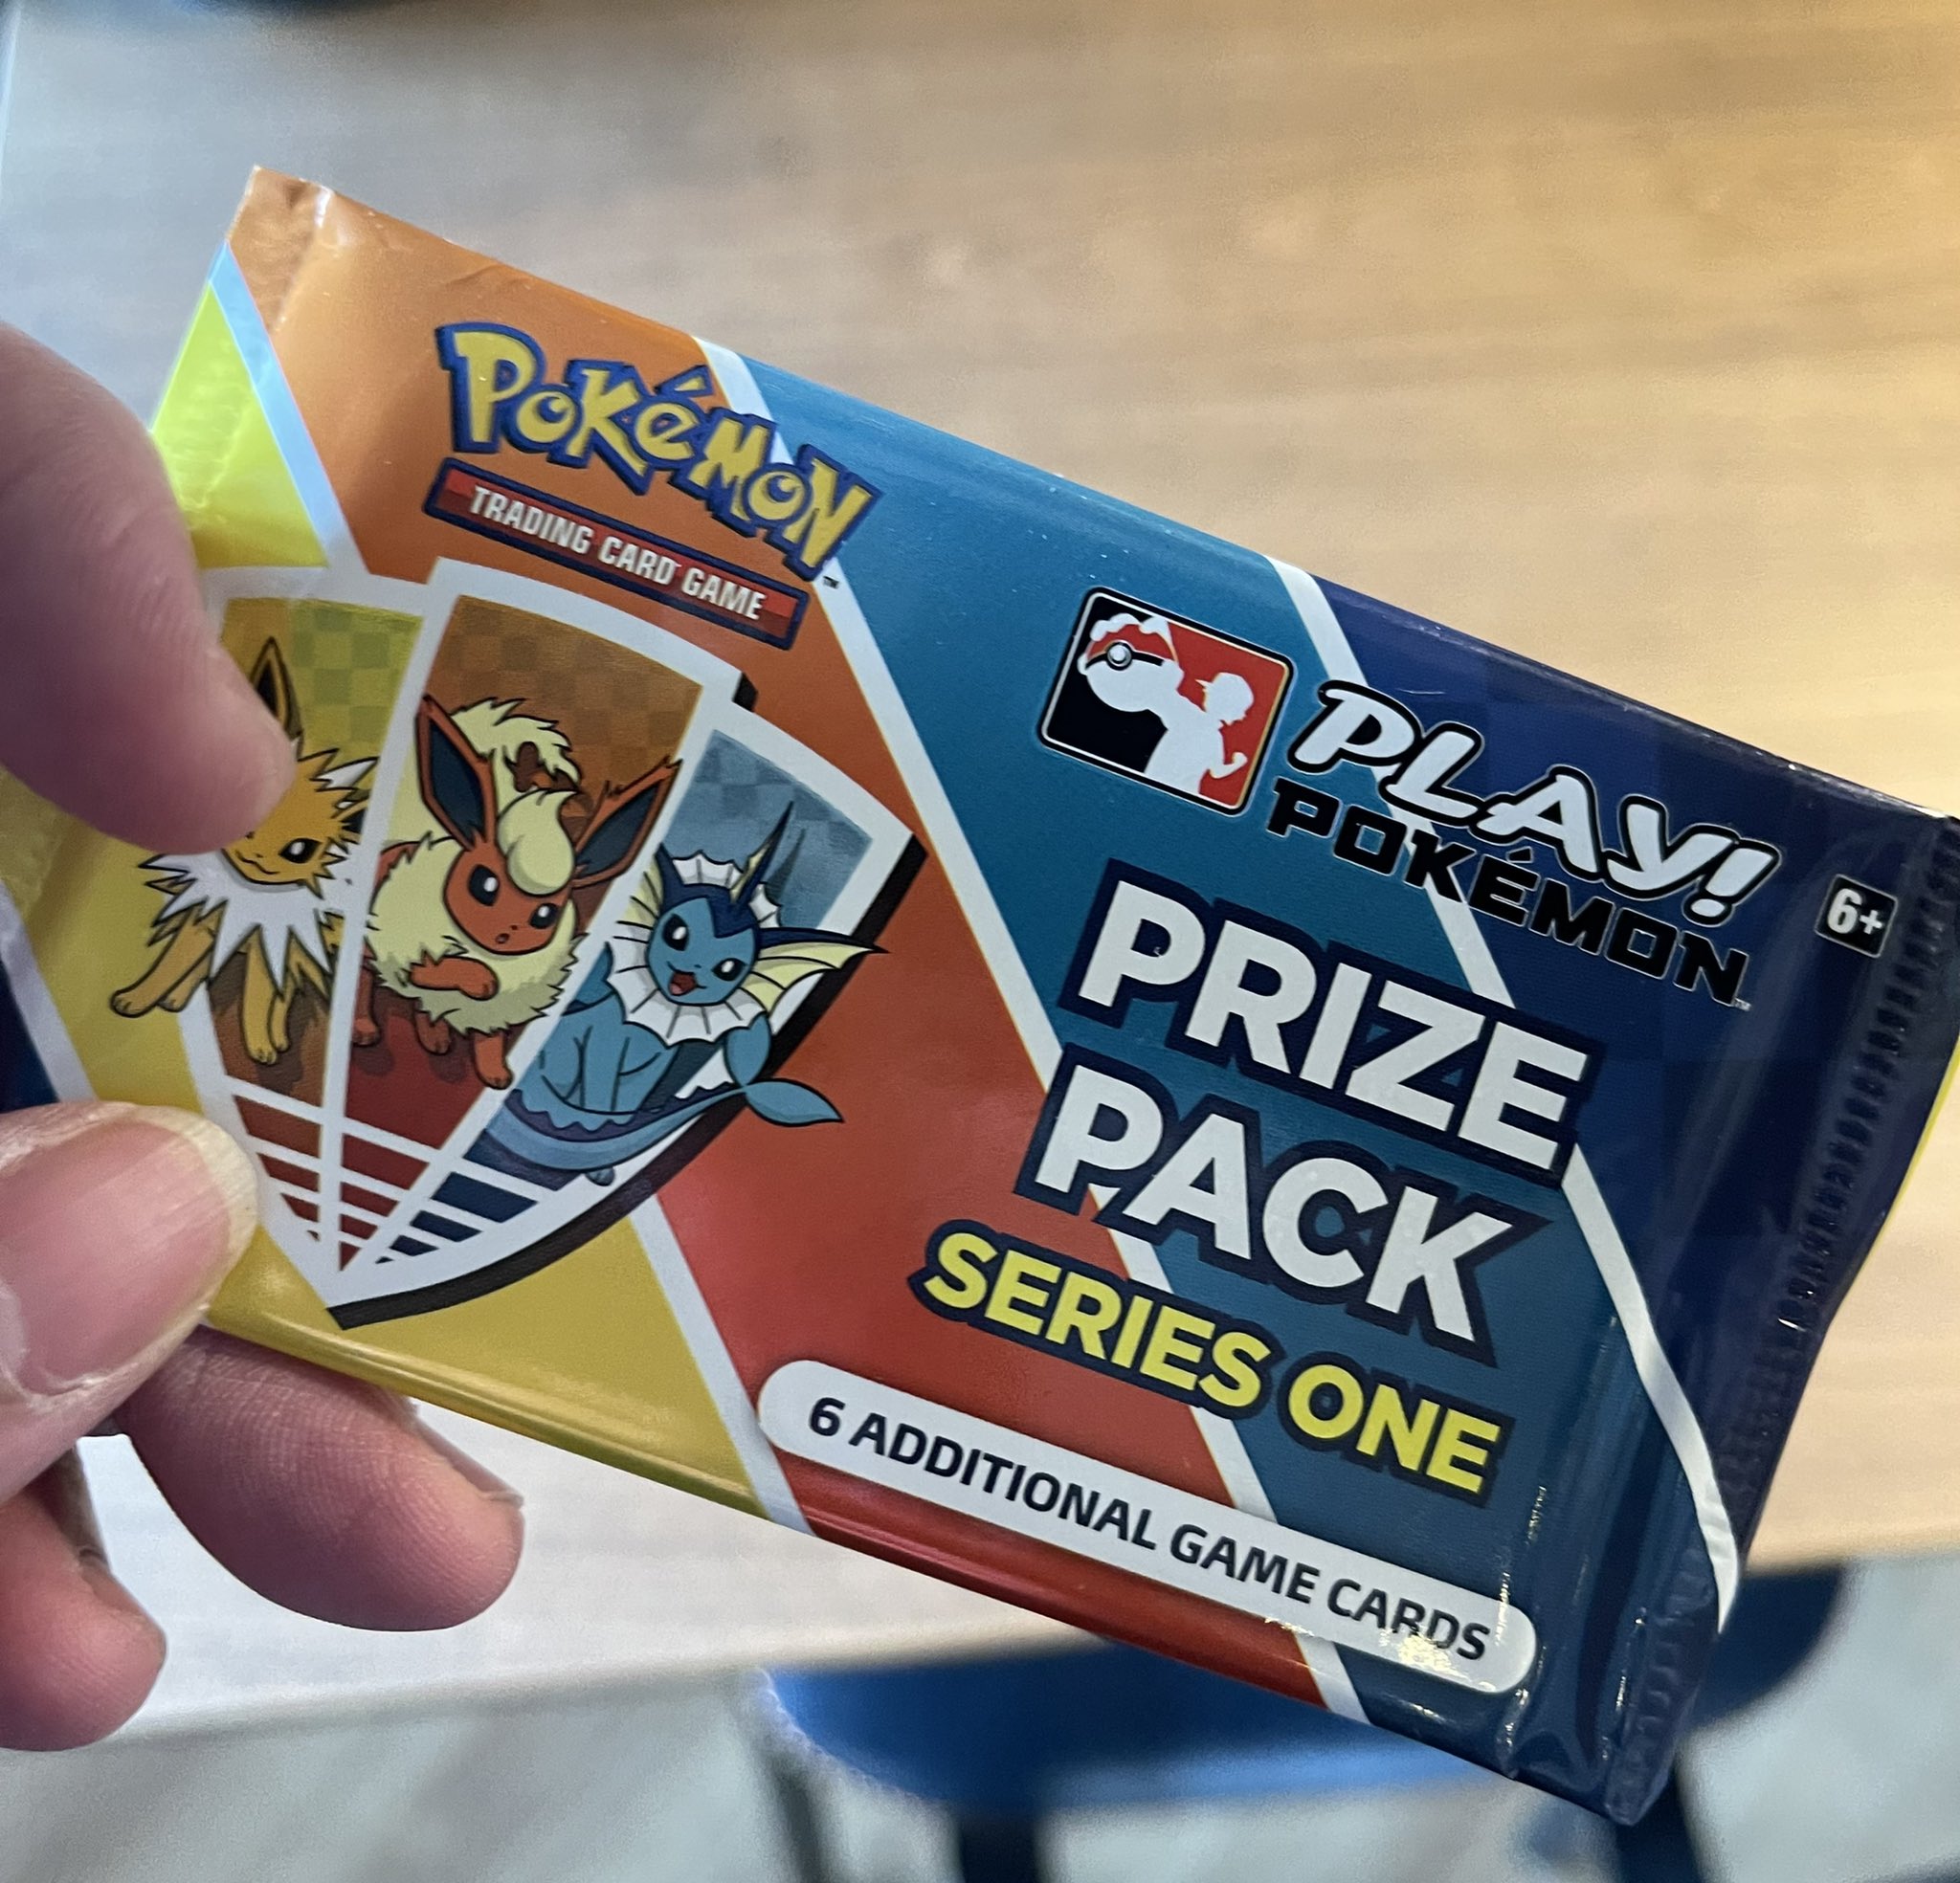 Play! Pokemon Prize Pack: Series One Set List! 